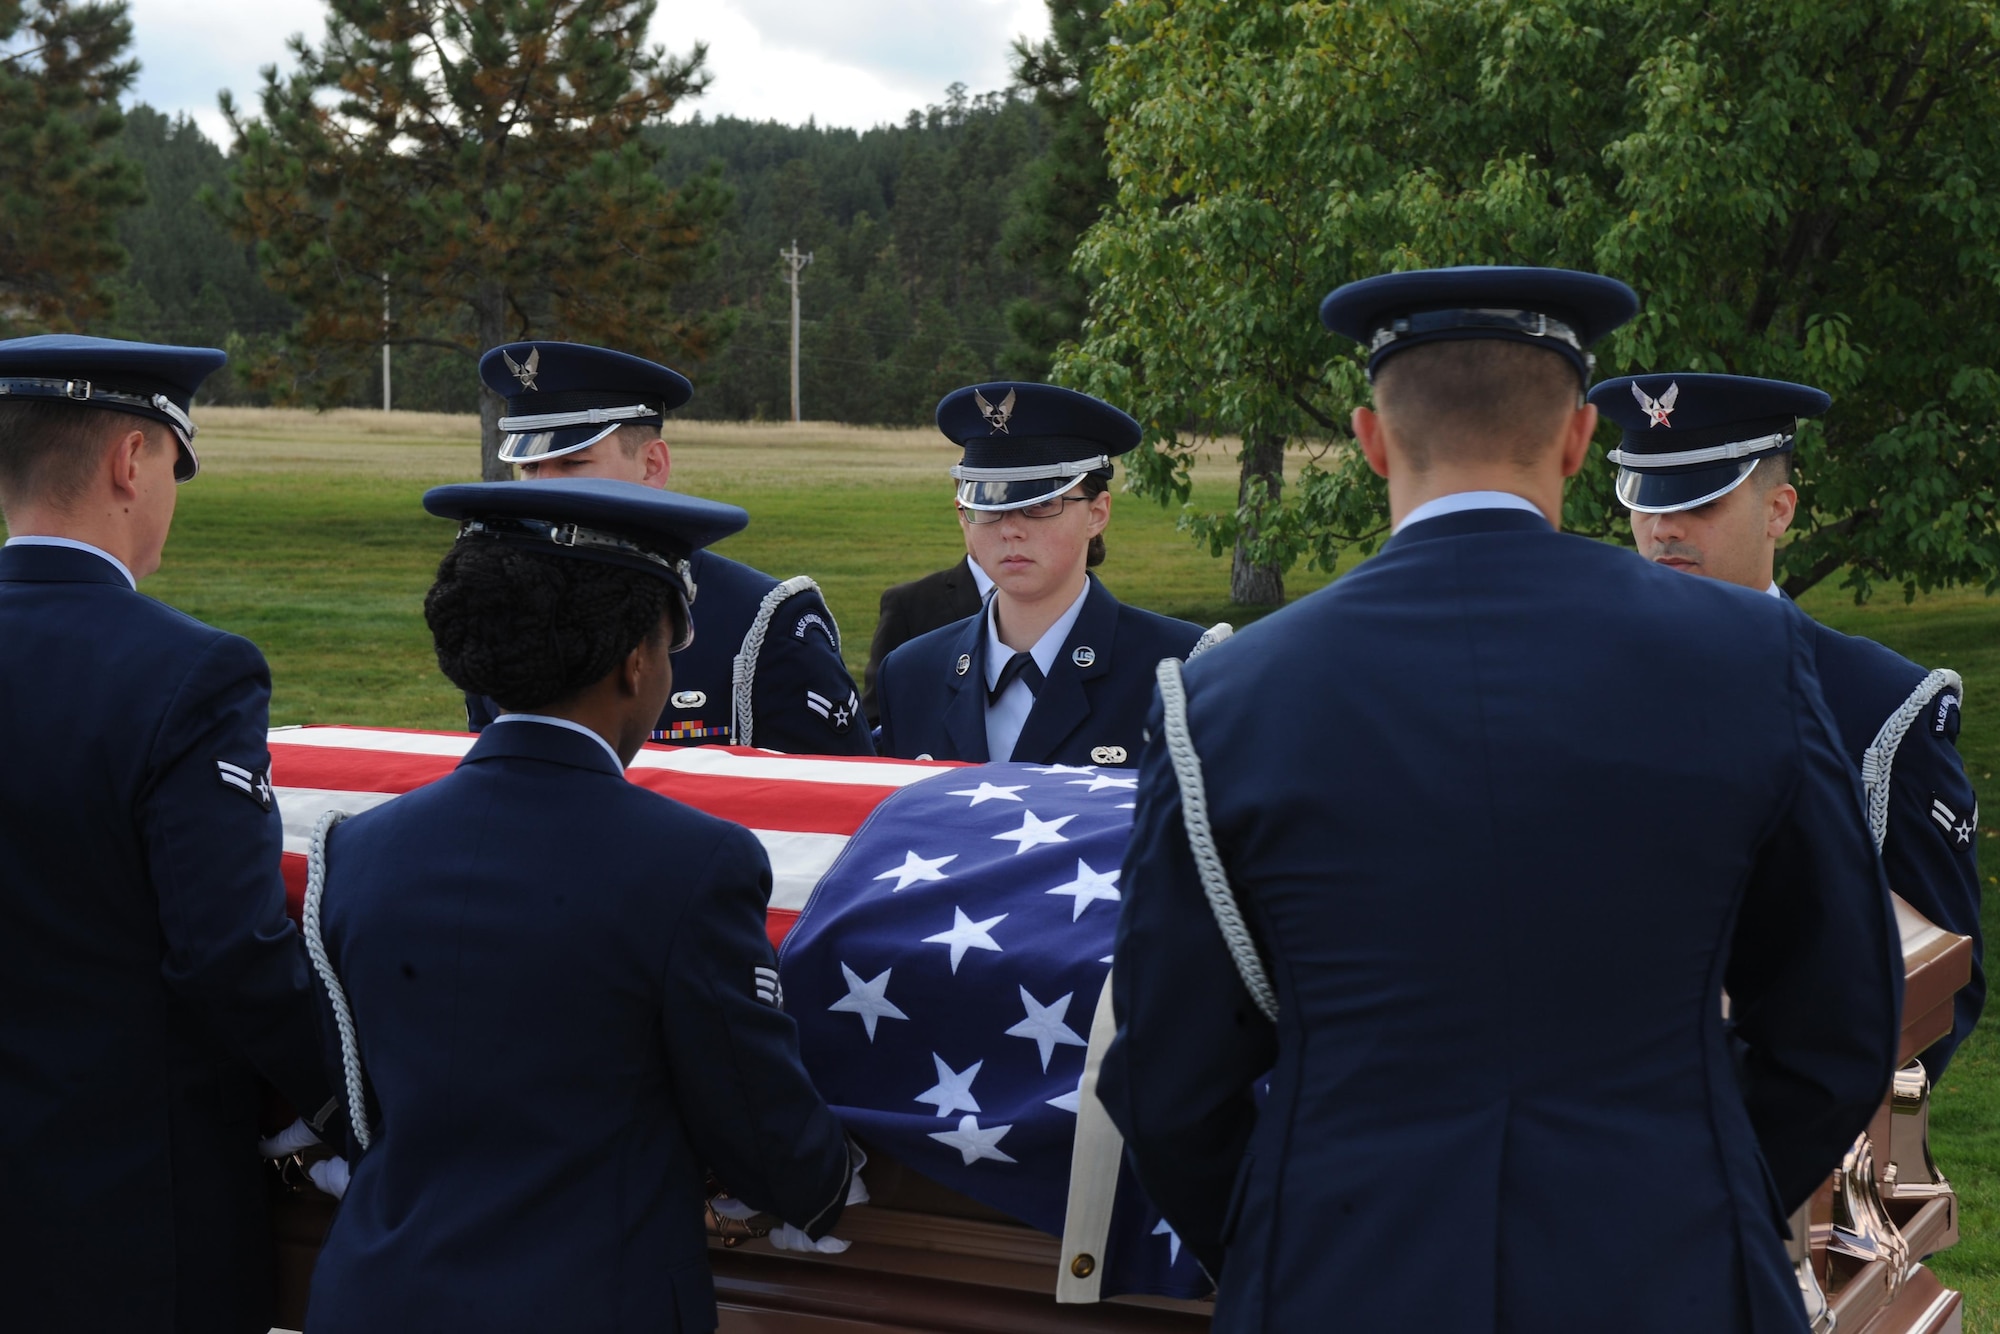 Airmen from the Ellsworth Air Force Base’s Honor Guard move the casket of a retiree during a funeral at Black Hills National Cemetery in Sturgis, S.D., Sept. 26, 2017. The funeral detail for pallbearers is comprised of a handoff to take the casket, a carry, a mark, a cross-mark, a fold and a noncommissioned officer in charge of the pallbearers to lead the team through the detail. (U.S. Air Force photo by Airman Nicolas Z. Erwin)